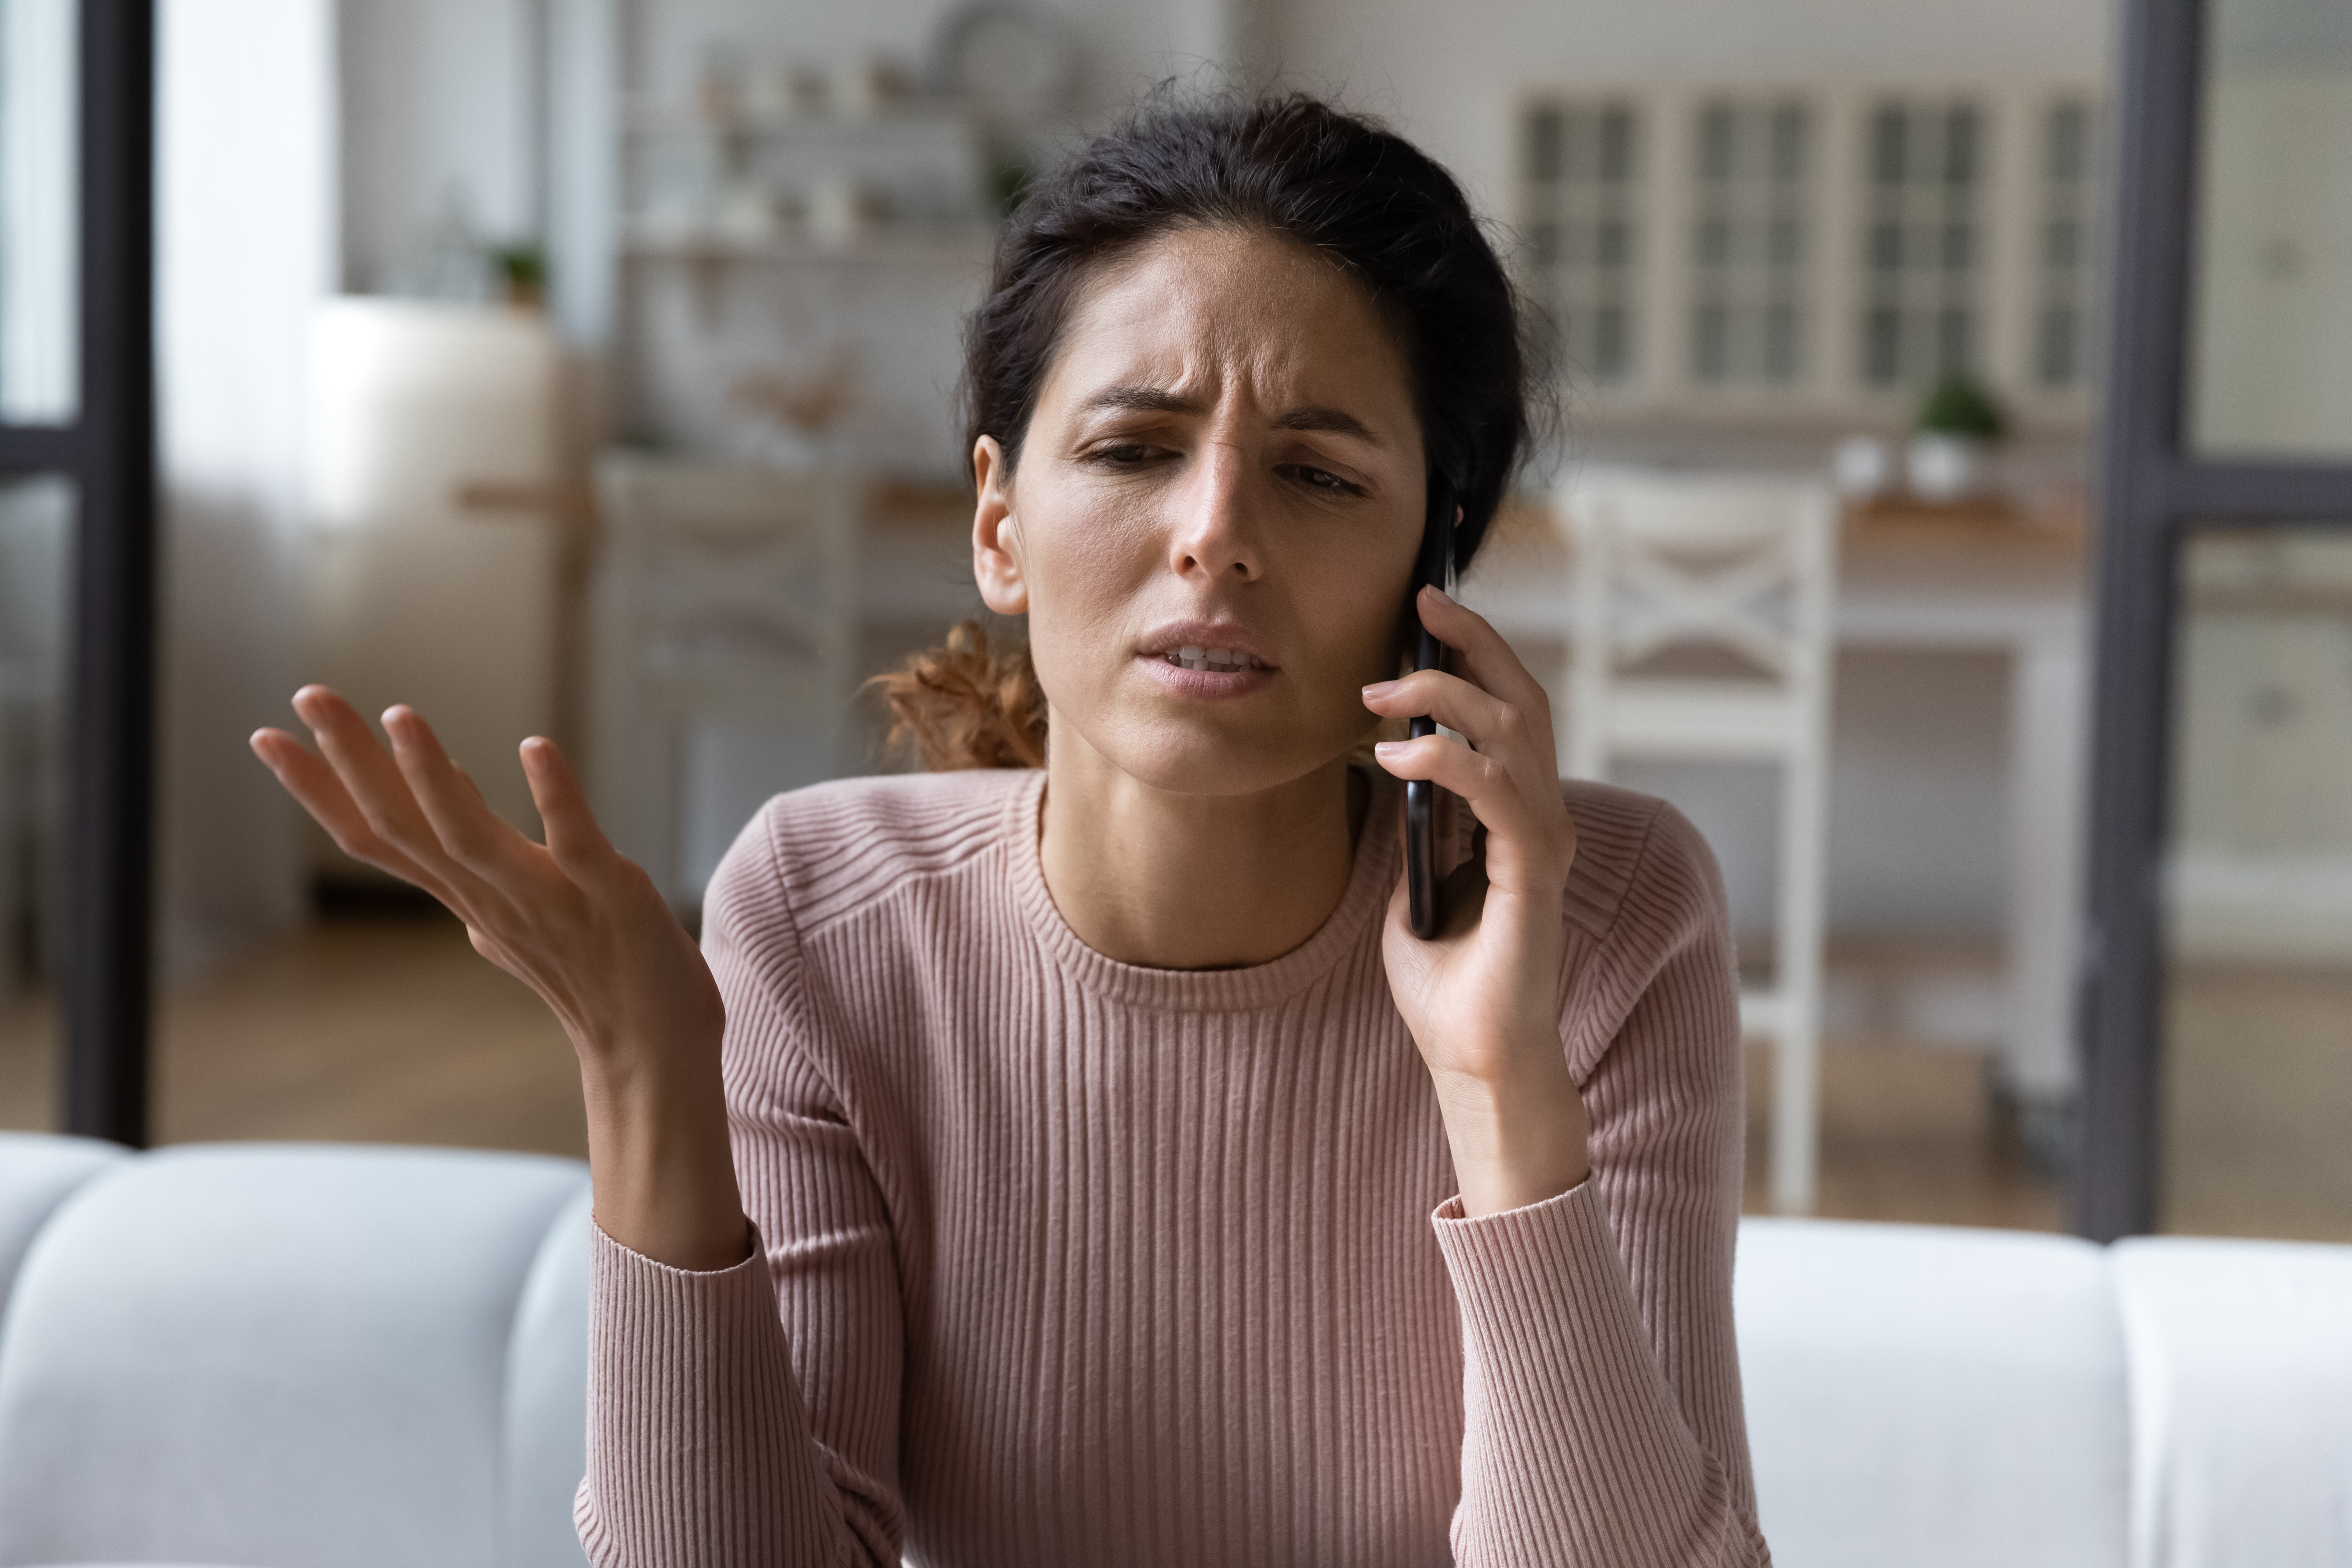 Upset woman talking on the phone | Source: Shutterstock